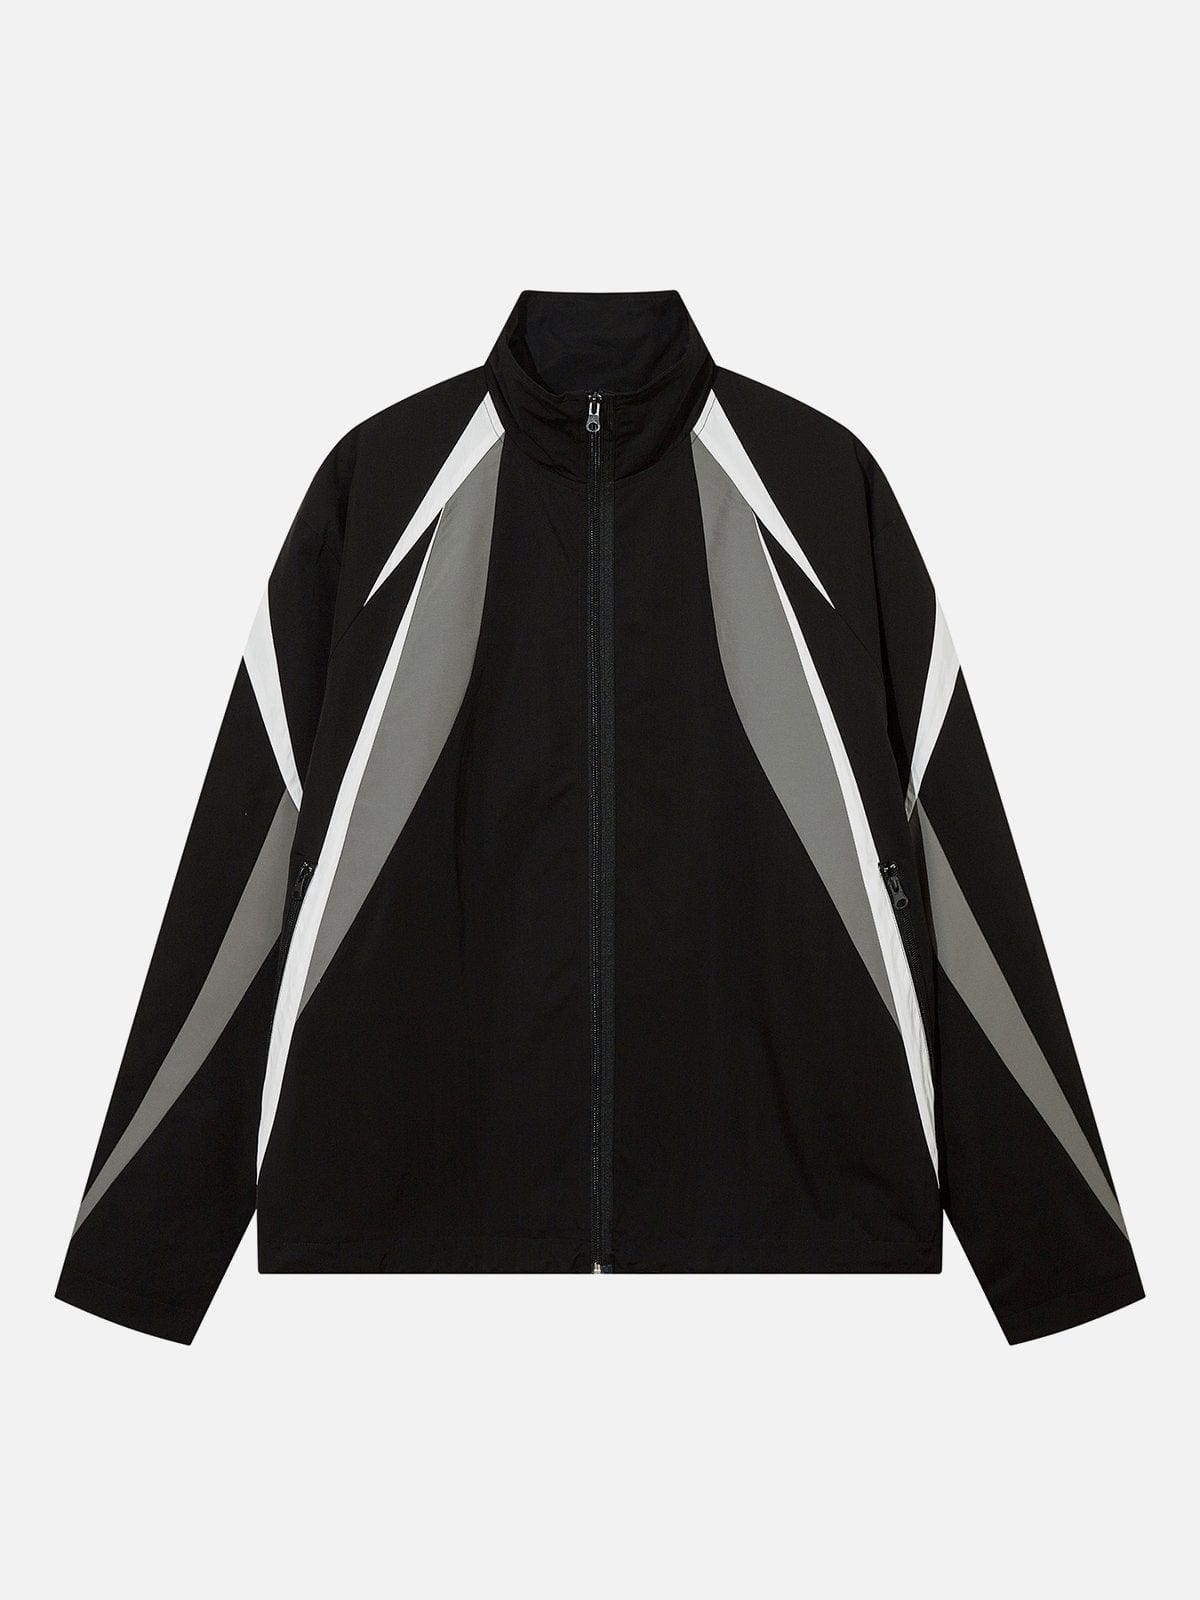 NEV Windproof Material Splicing Jacket